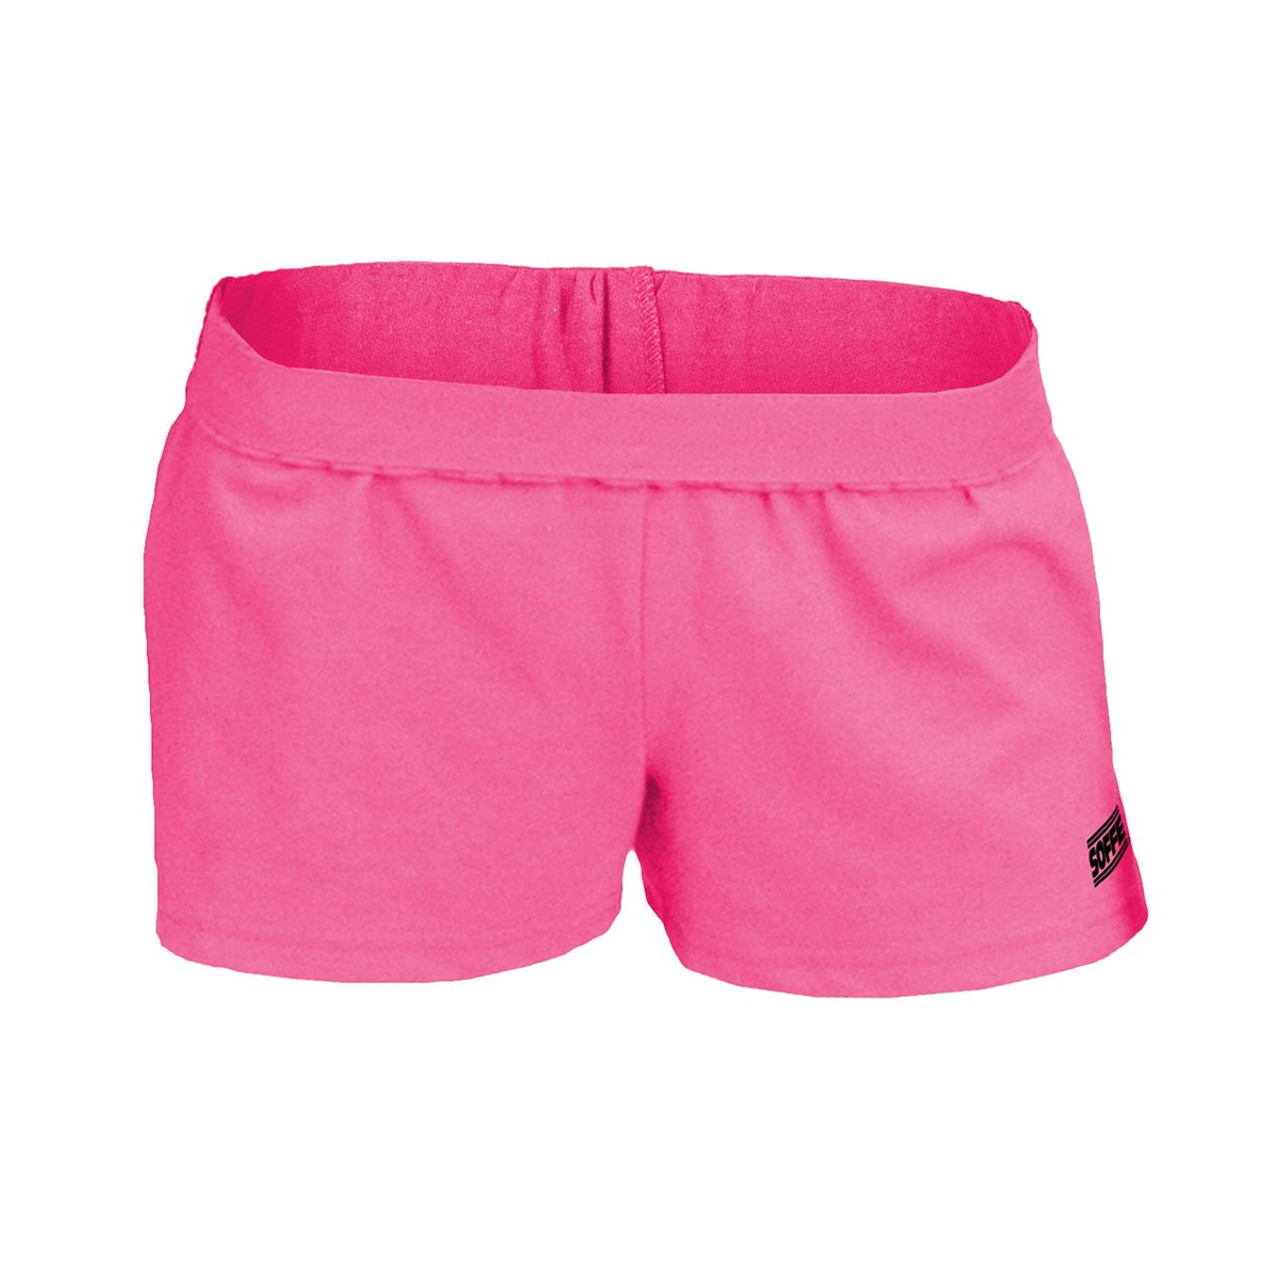 Soffe Junior Girls Low-Rise 'Soffe' Shorts Youth Large 12-14